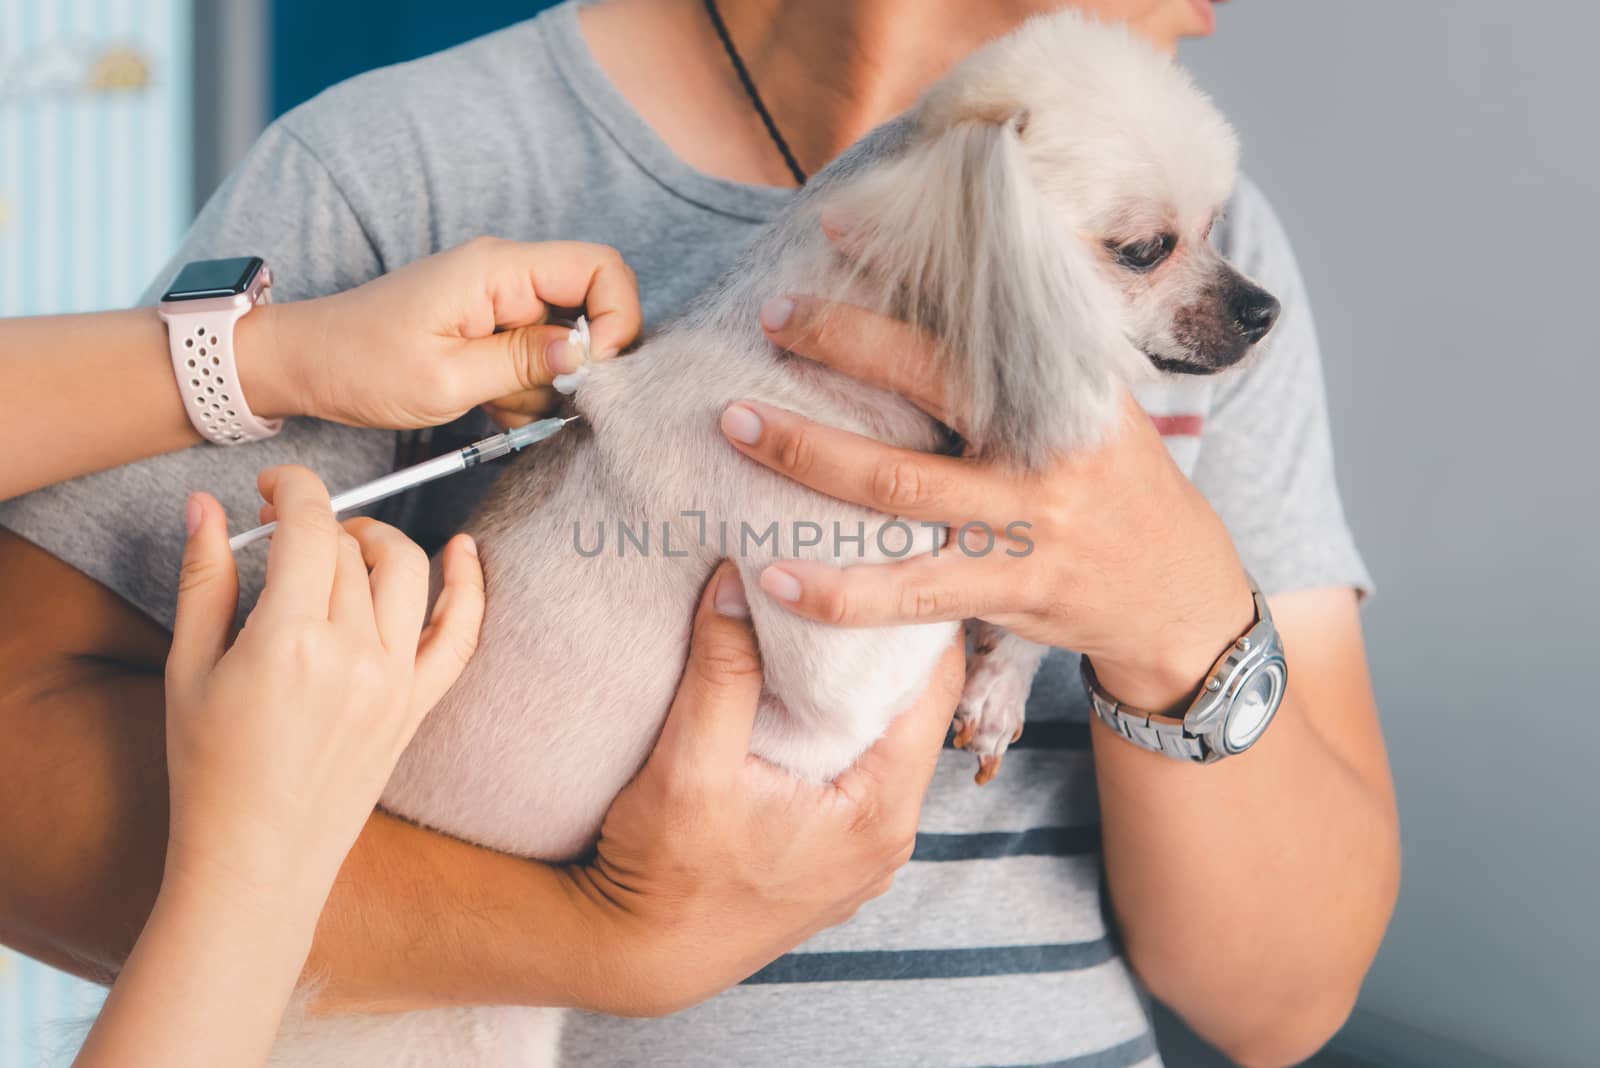 Dog get vaccinated against by veterinarian doctor by PongMoji